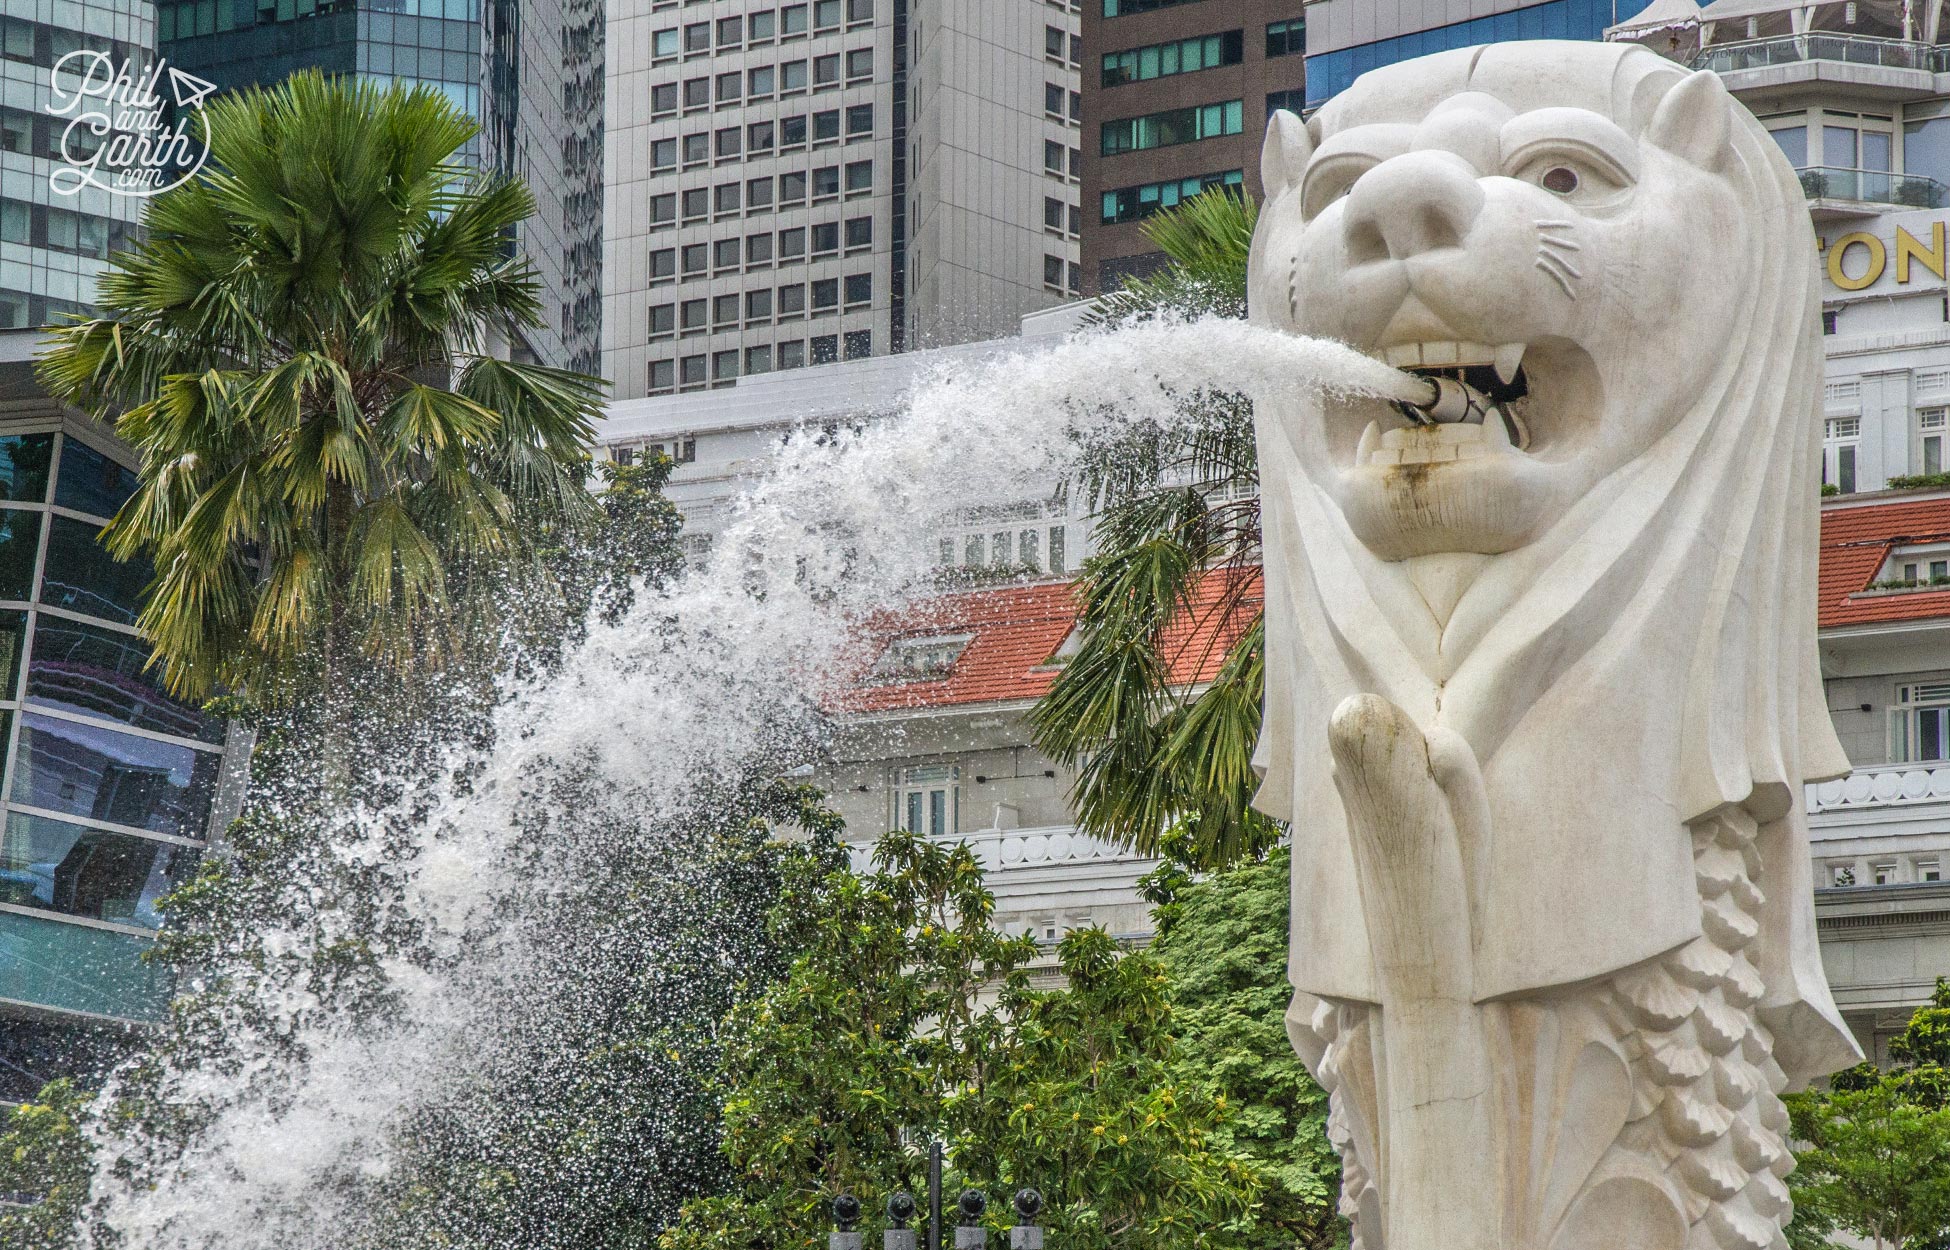 The Merlion - There are a total of 5 statues across Singapore